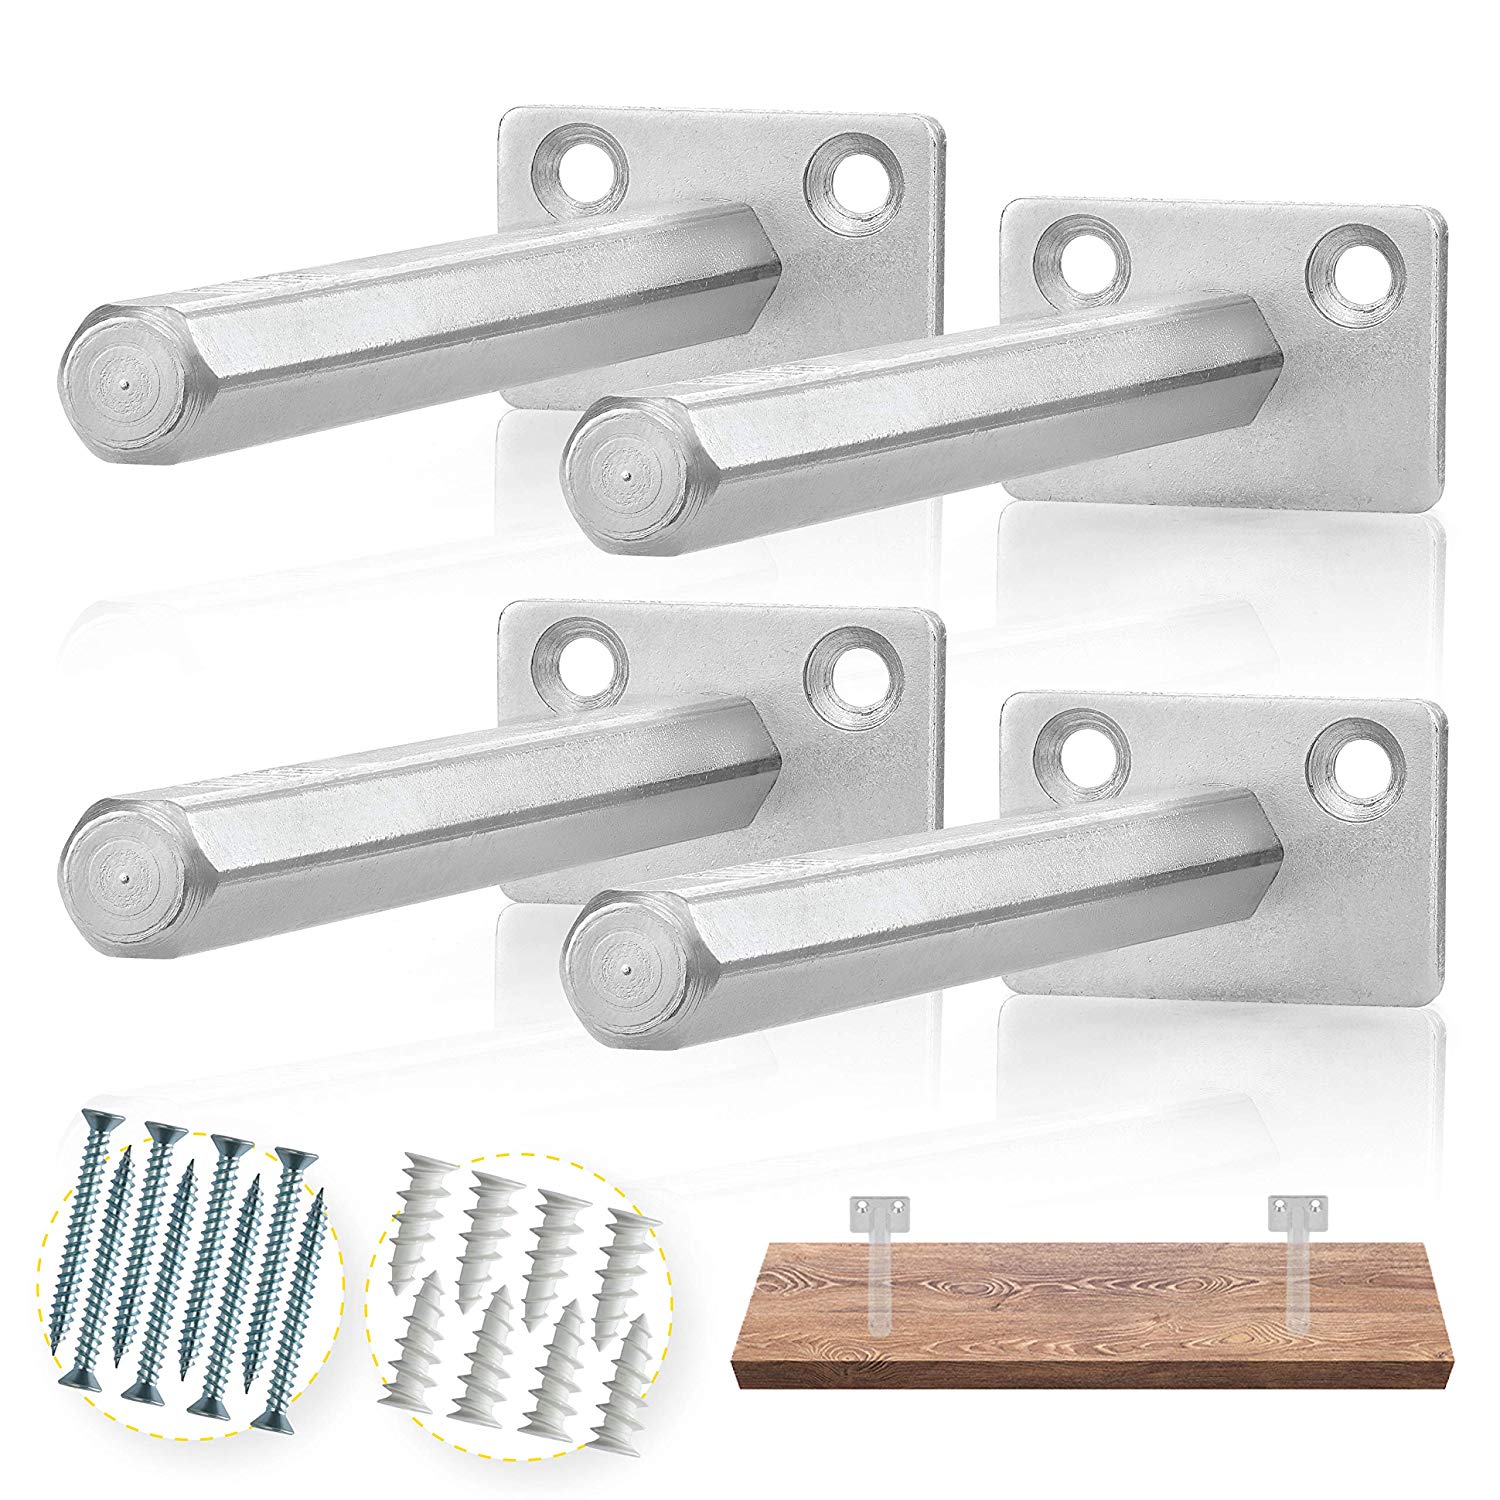 batoda floating shelf bracket pcs galvanized steel xuzl brackets for shelves blind supports hidden wood concealed support shoes wall stand corner closet curved glass bathroom